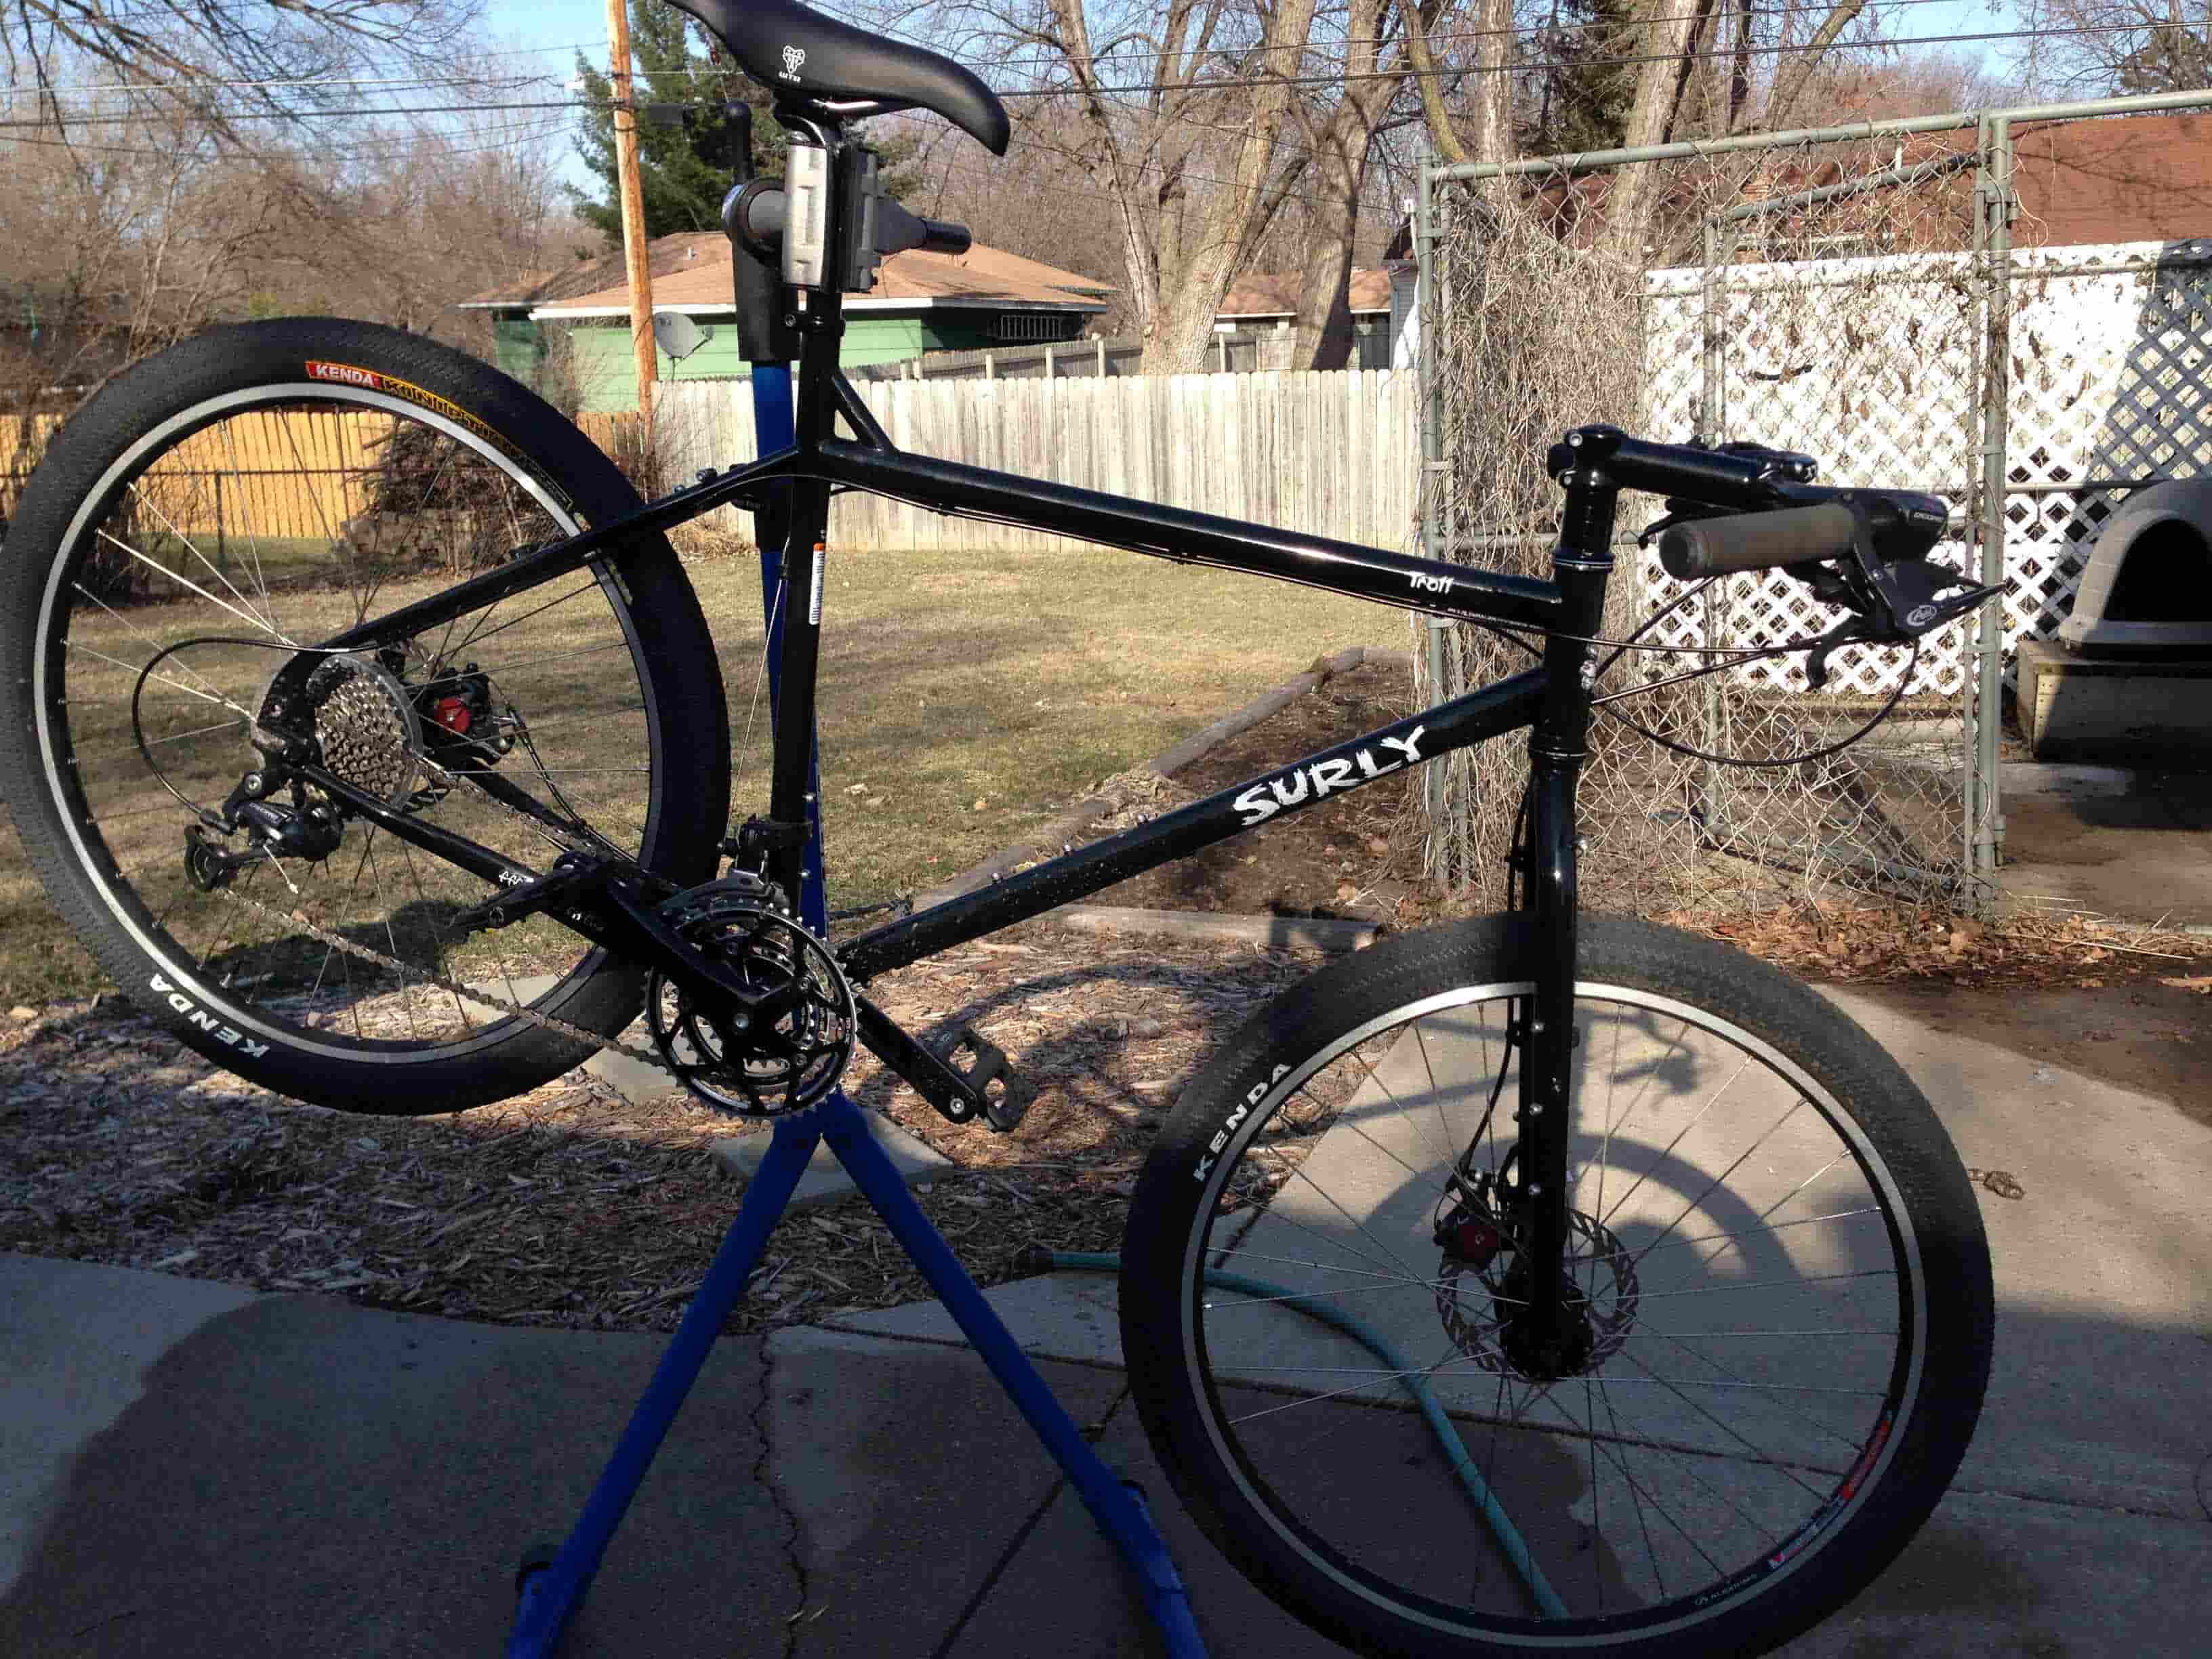 Right side view of a black Surly Troll bike, on a bike repair stand, parked on concrete beside a yard with a wood fence